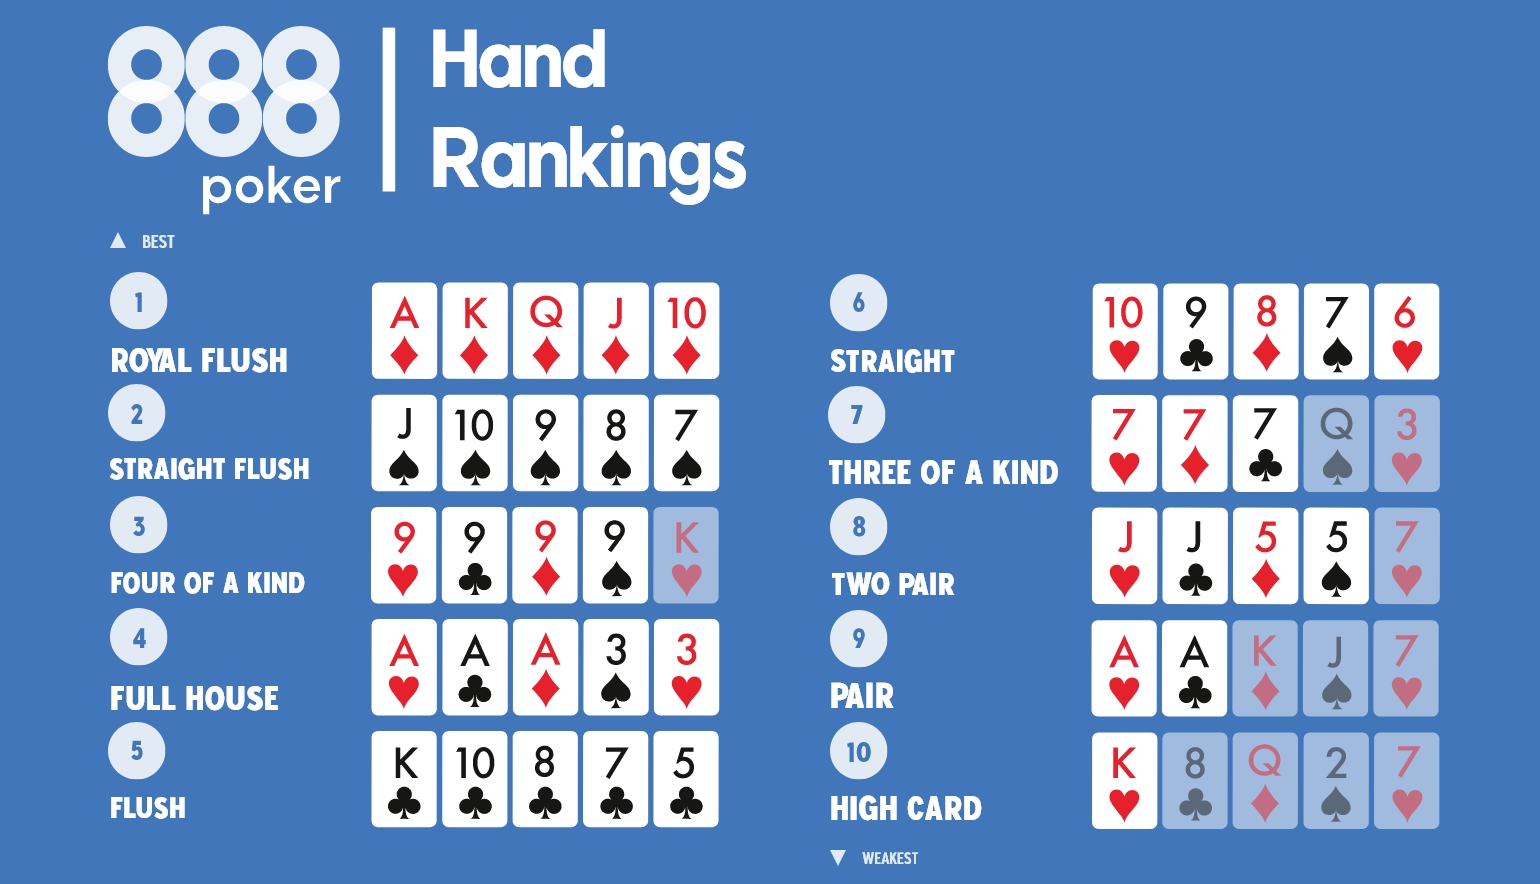 Is Four of a Kind the highest hand ranking in poker?